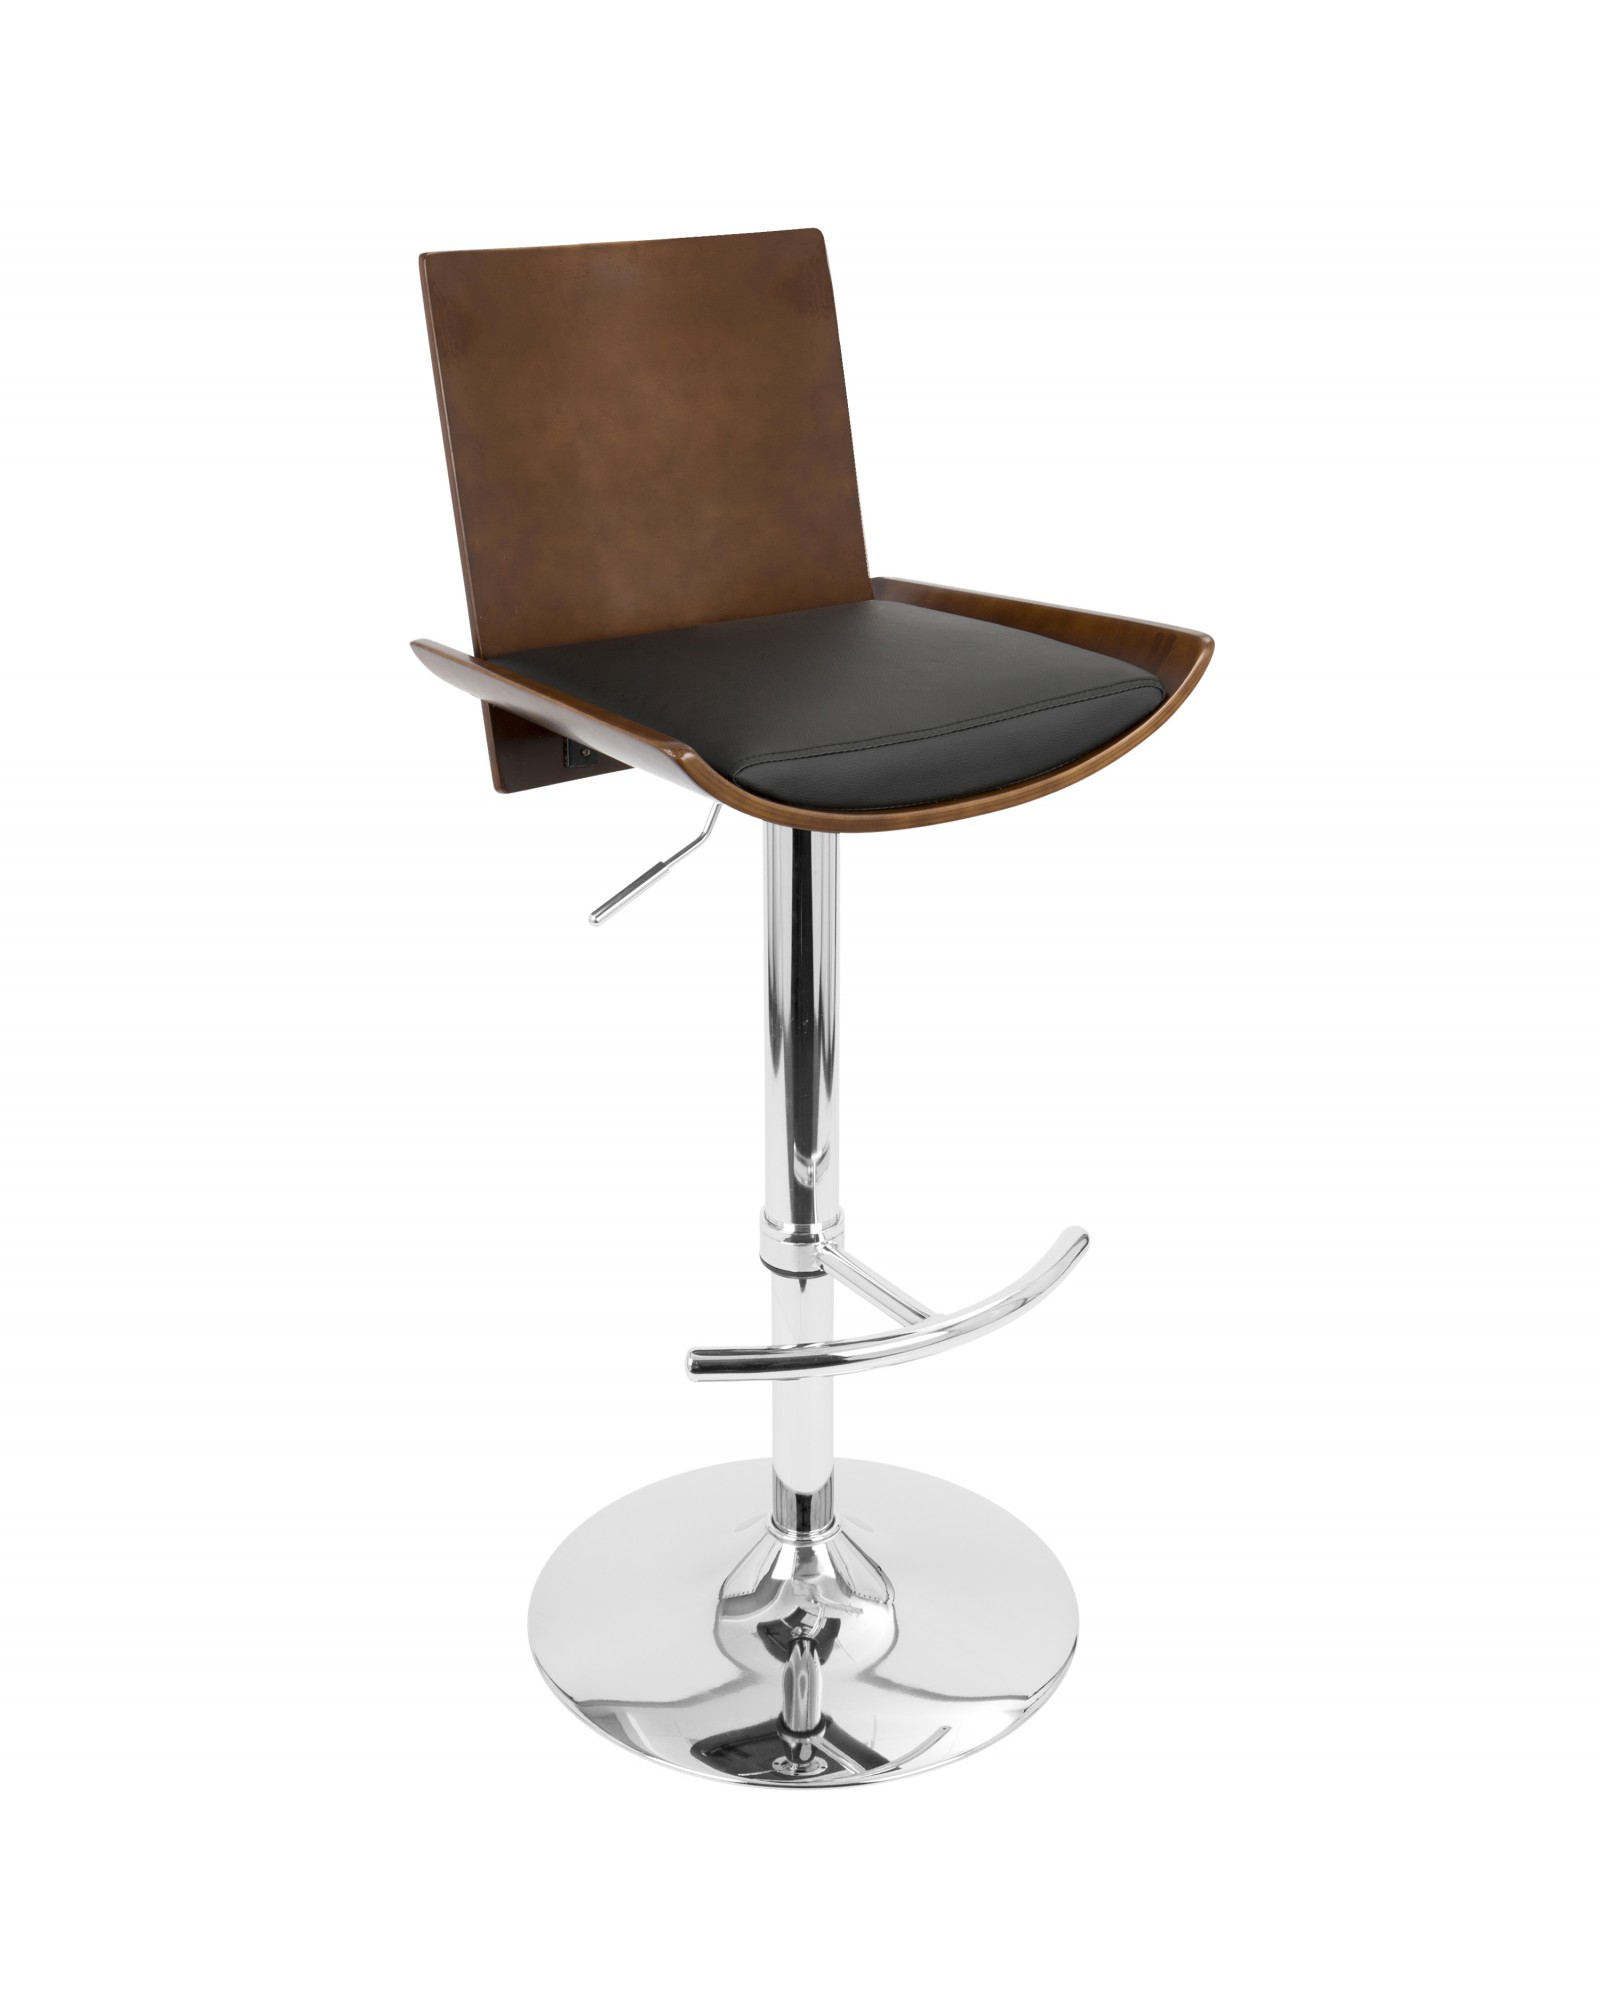 Vittorio Mid-Century Modern Adjustable Barstool with Swivel in Cherry and Black Faux Leather